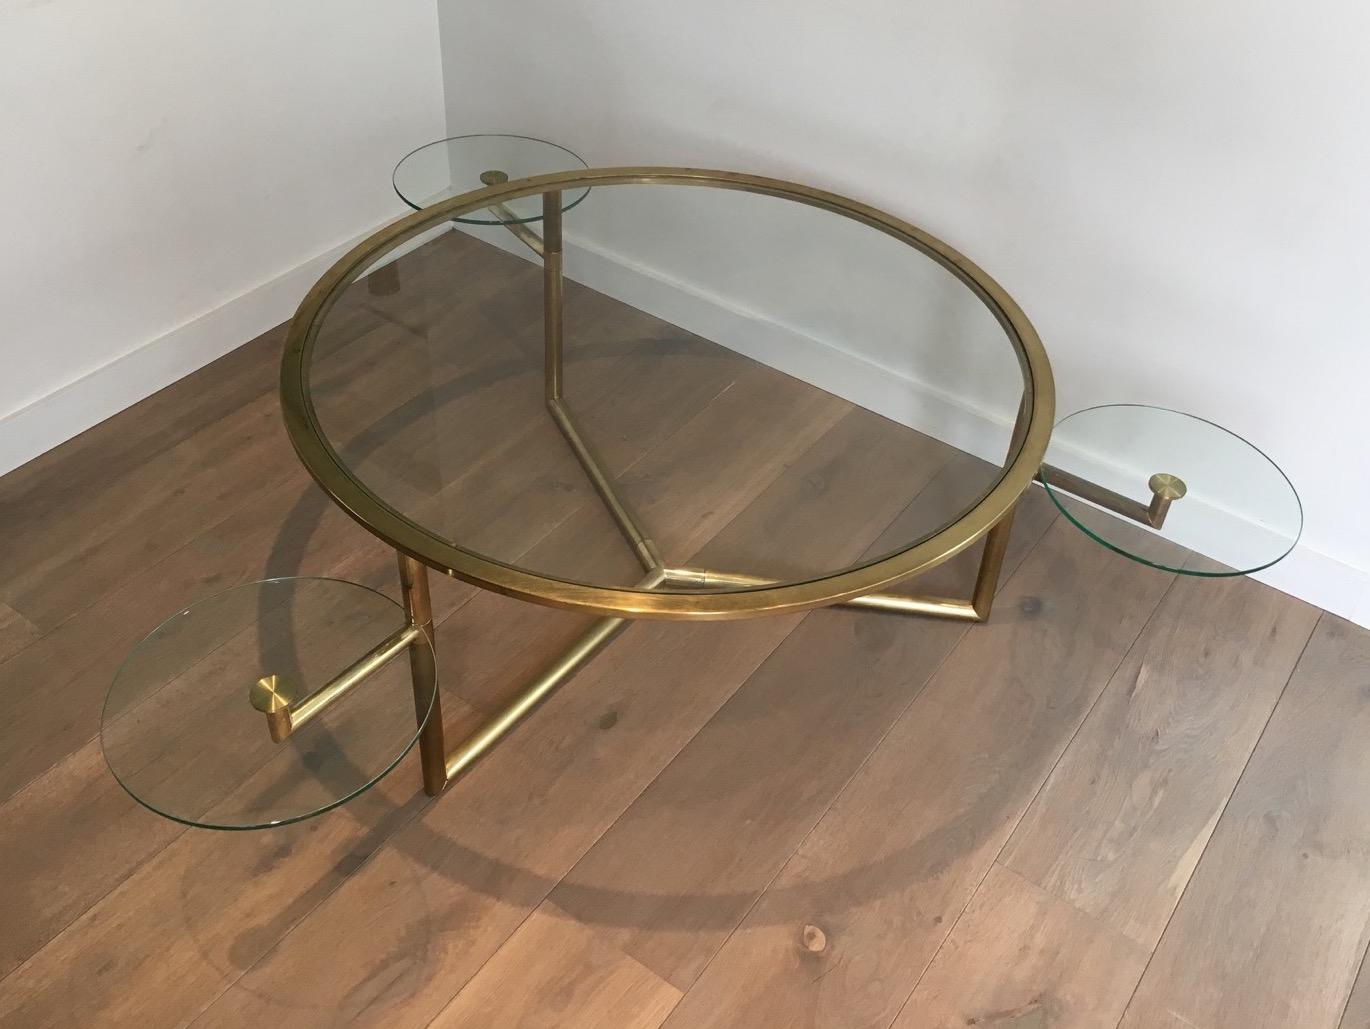 This rare round coffee table is gold gilt on chrome. The gilt left a little bit on some areas, which gives it a great patina. It is very nice and convenient with its removable round glass shelves that are a way to extend the table. It is French,